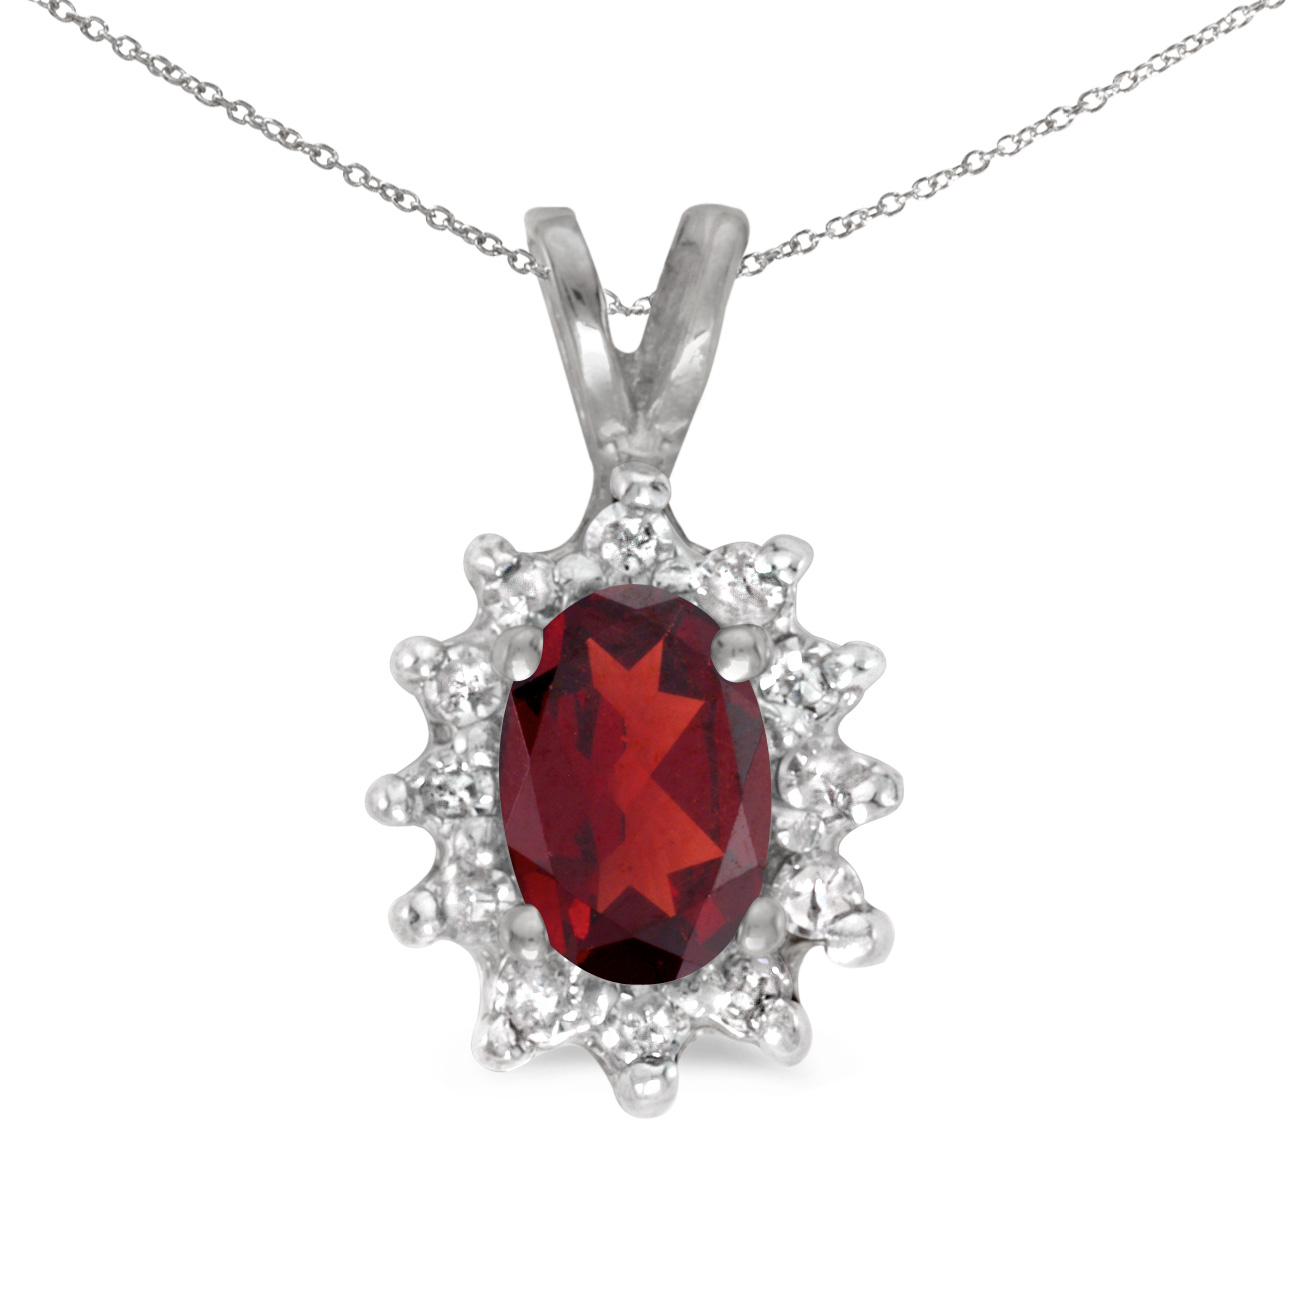 JCX2743: This 14k white gold oval garnet and diamond pendant features a 6x4 mm genuine natural garnet with a 0.47 ct total weight.